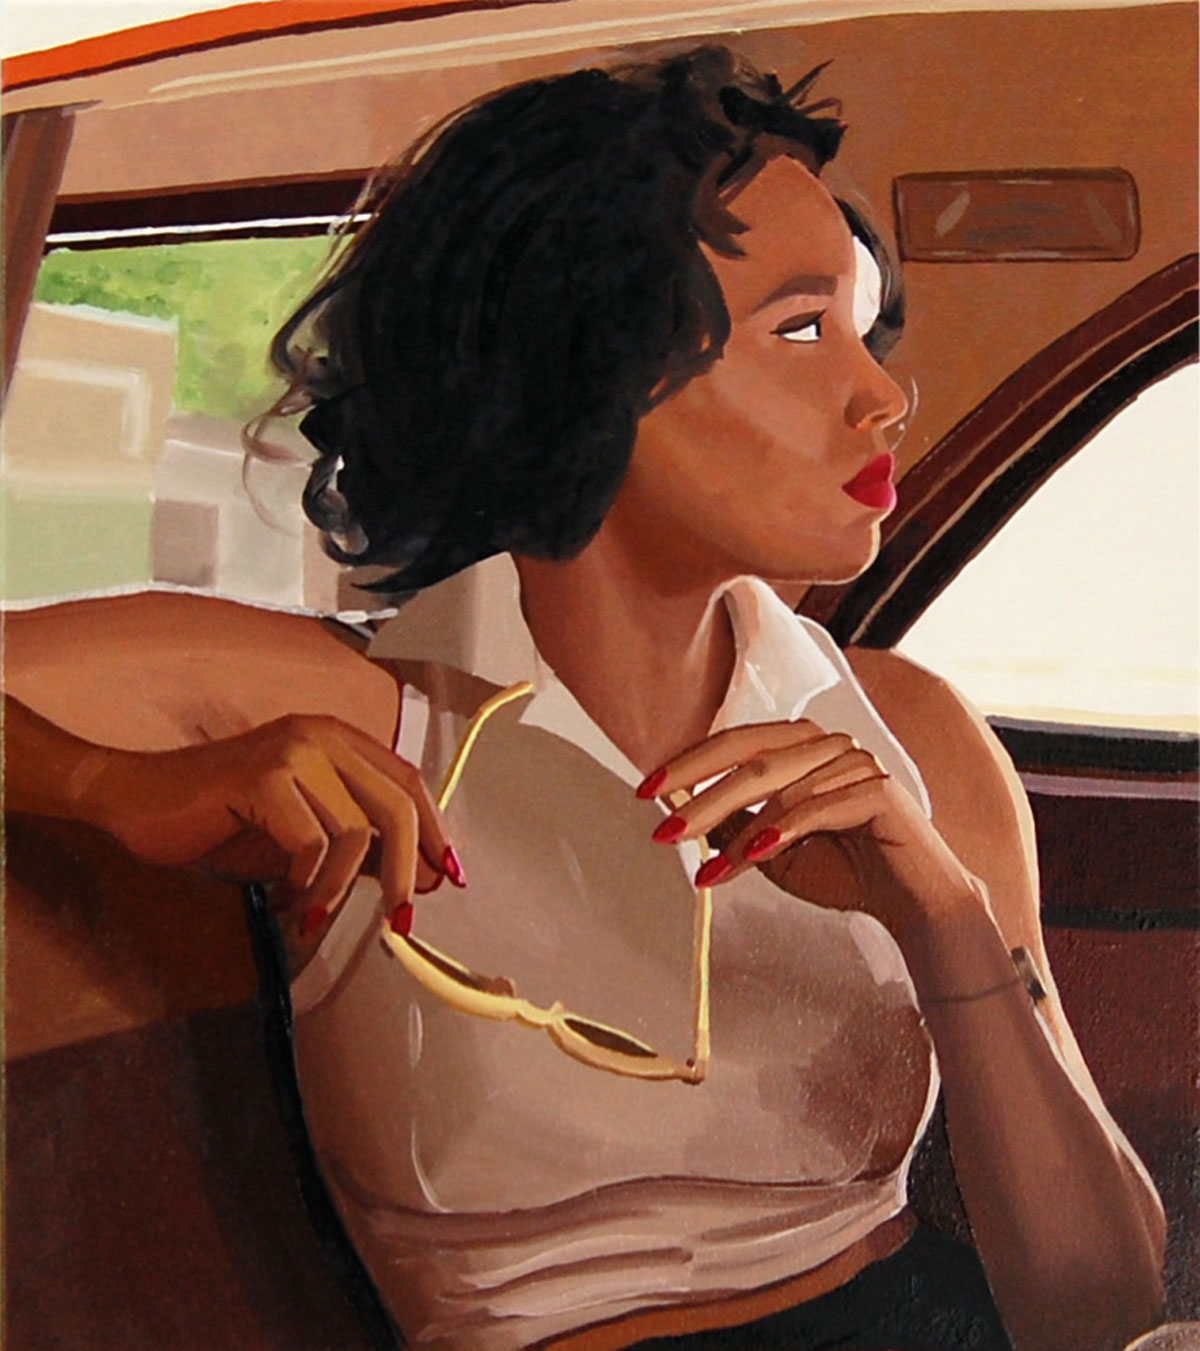 Woman seated in the back of a car holding sunglasses while looking out the window